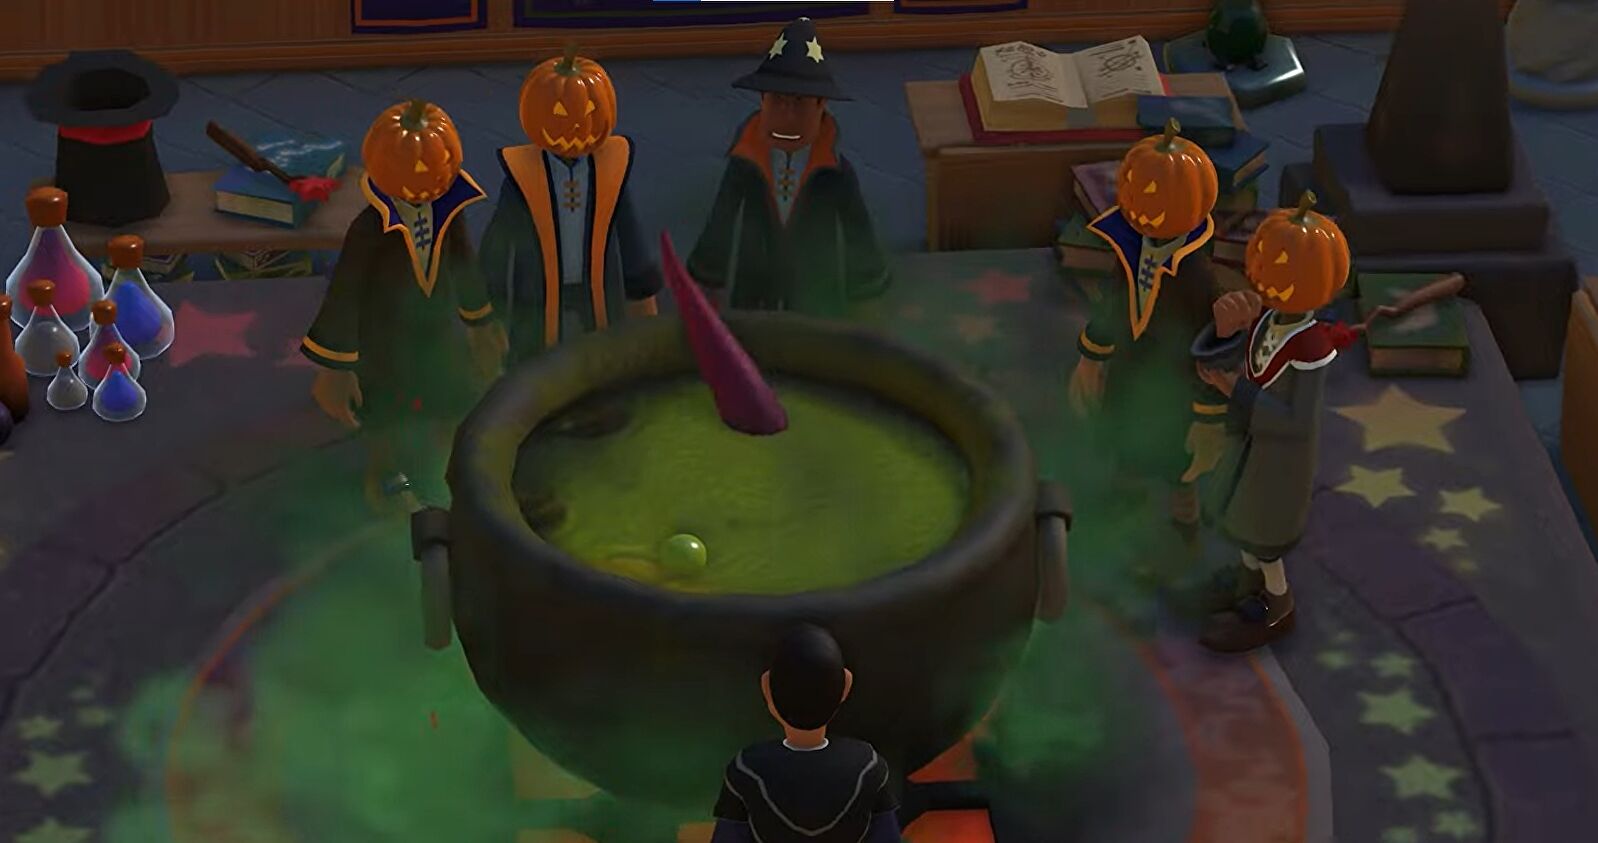 Two Point Campus’s Halloween update adds zombies, pumpkins and a new challenge mode